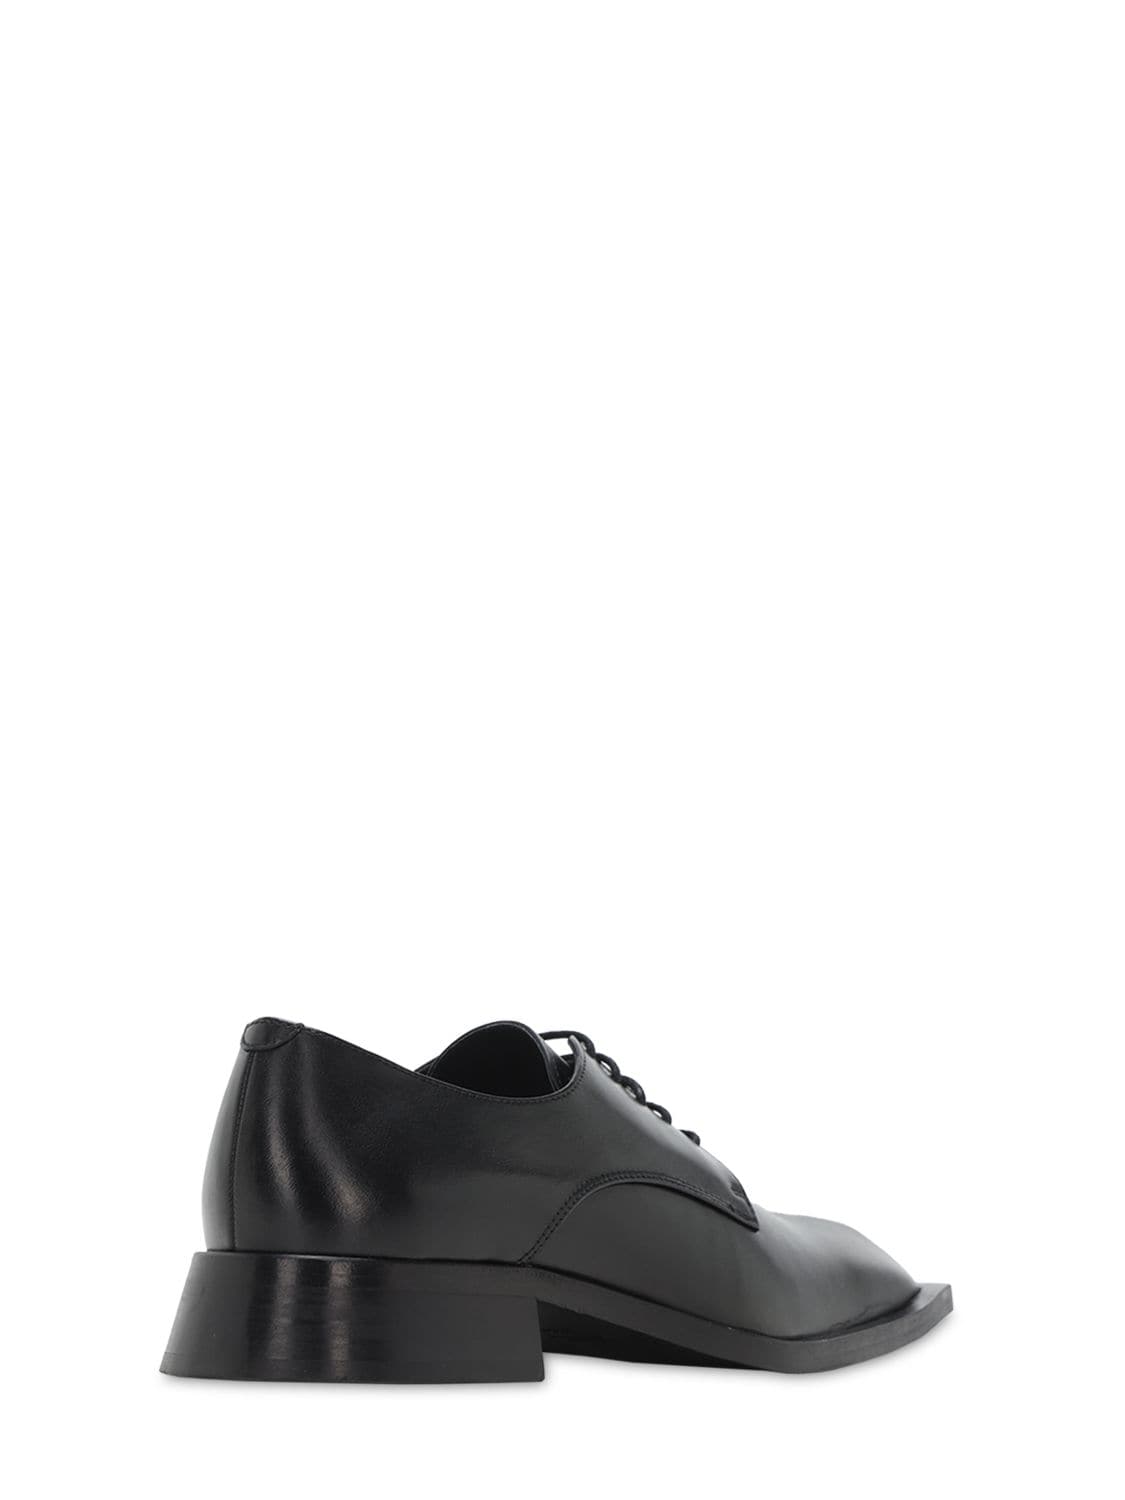 Martine Rose 30mm Daab Derby Leather Lace-up Shoes In Black | ModeSens